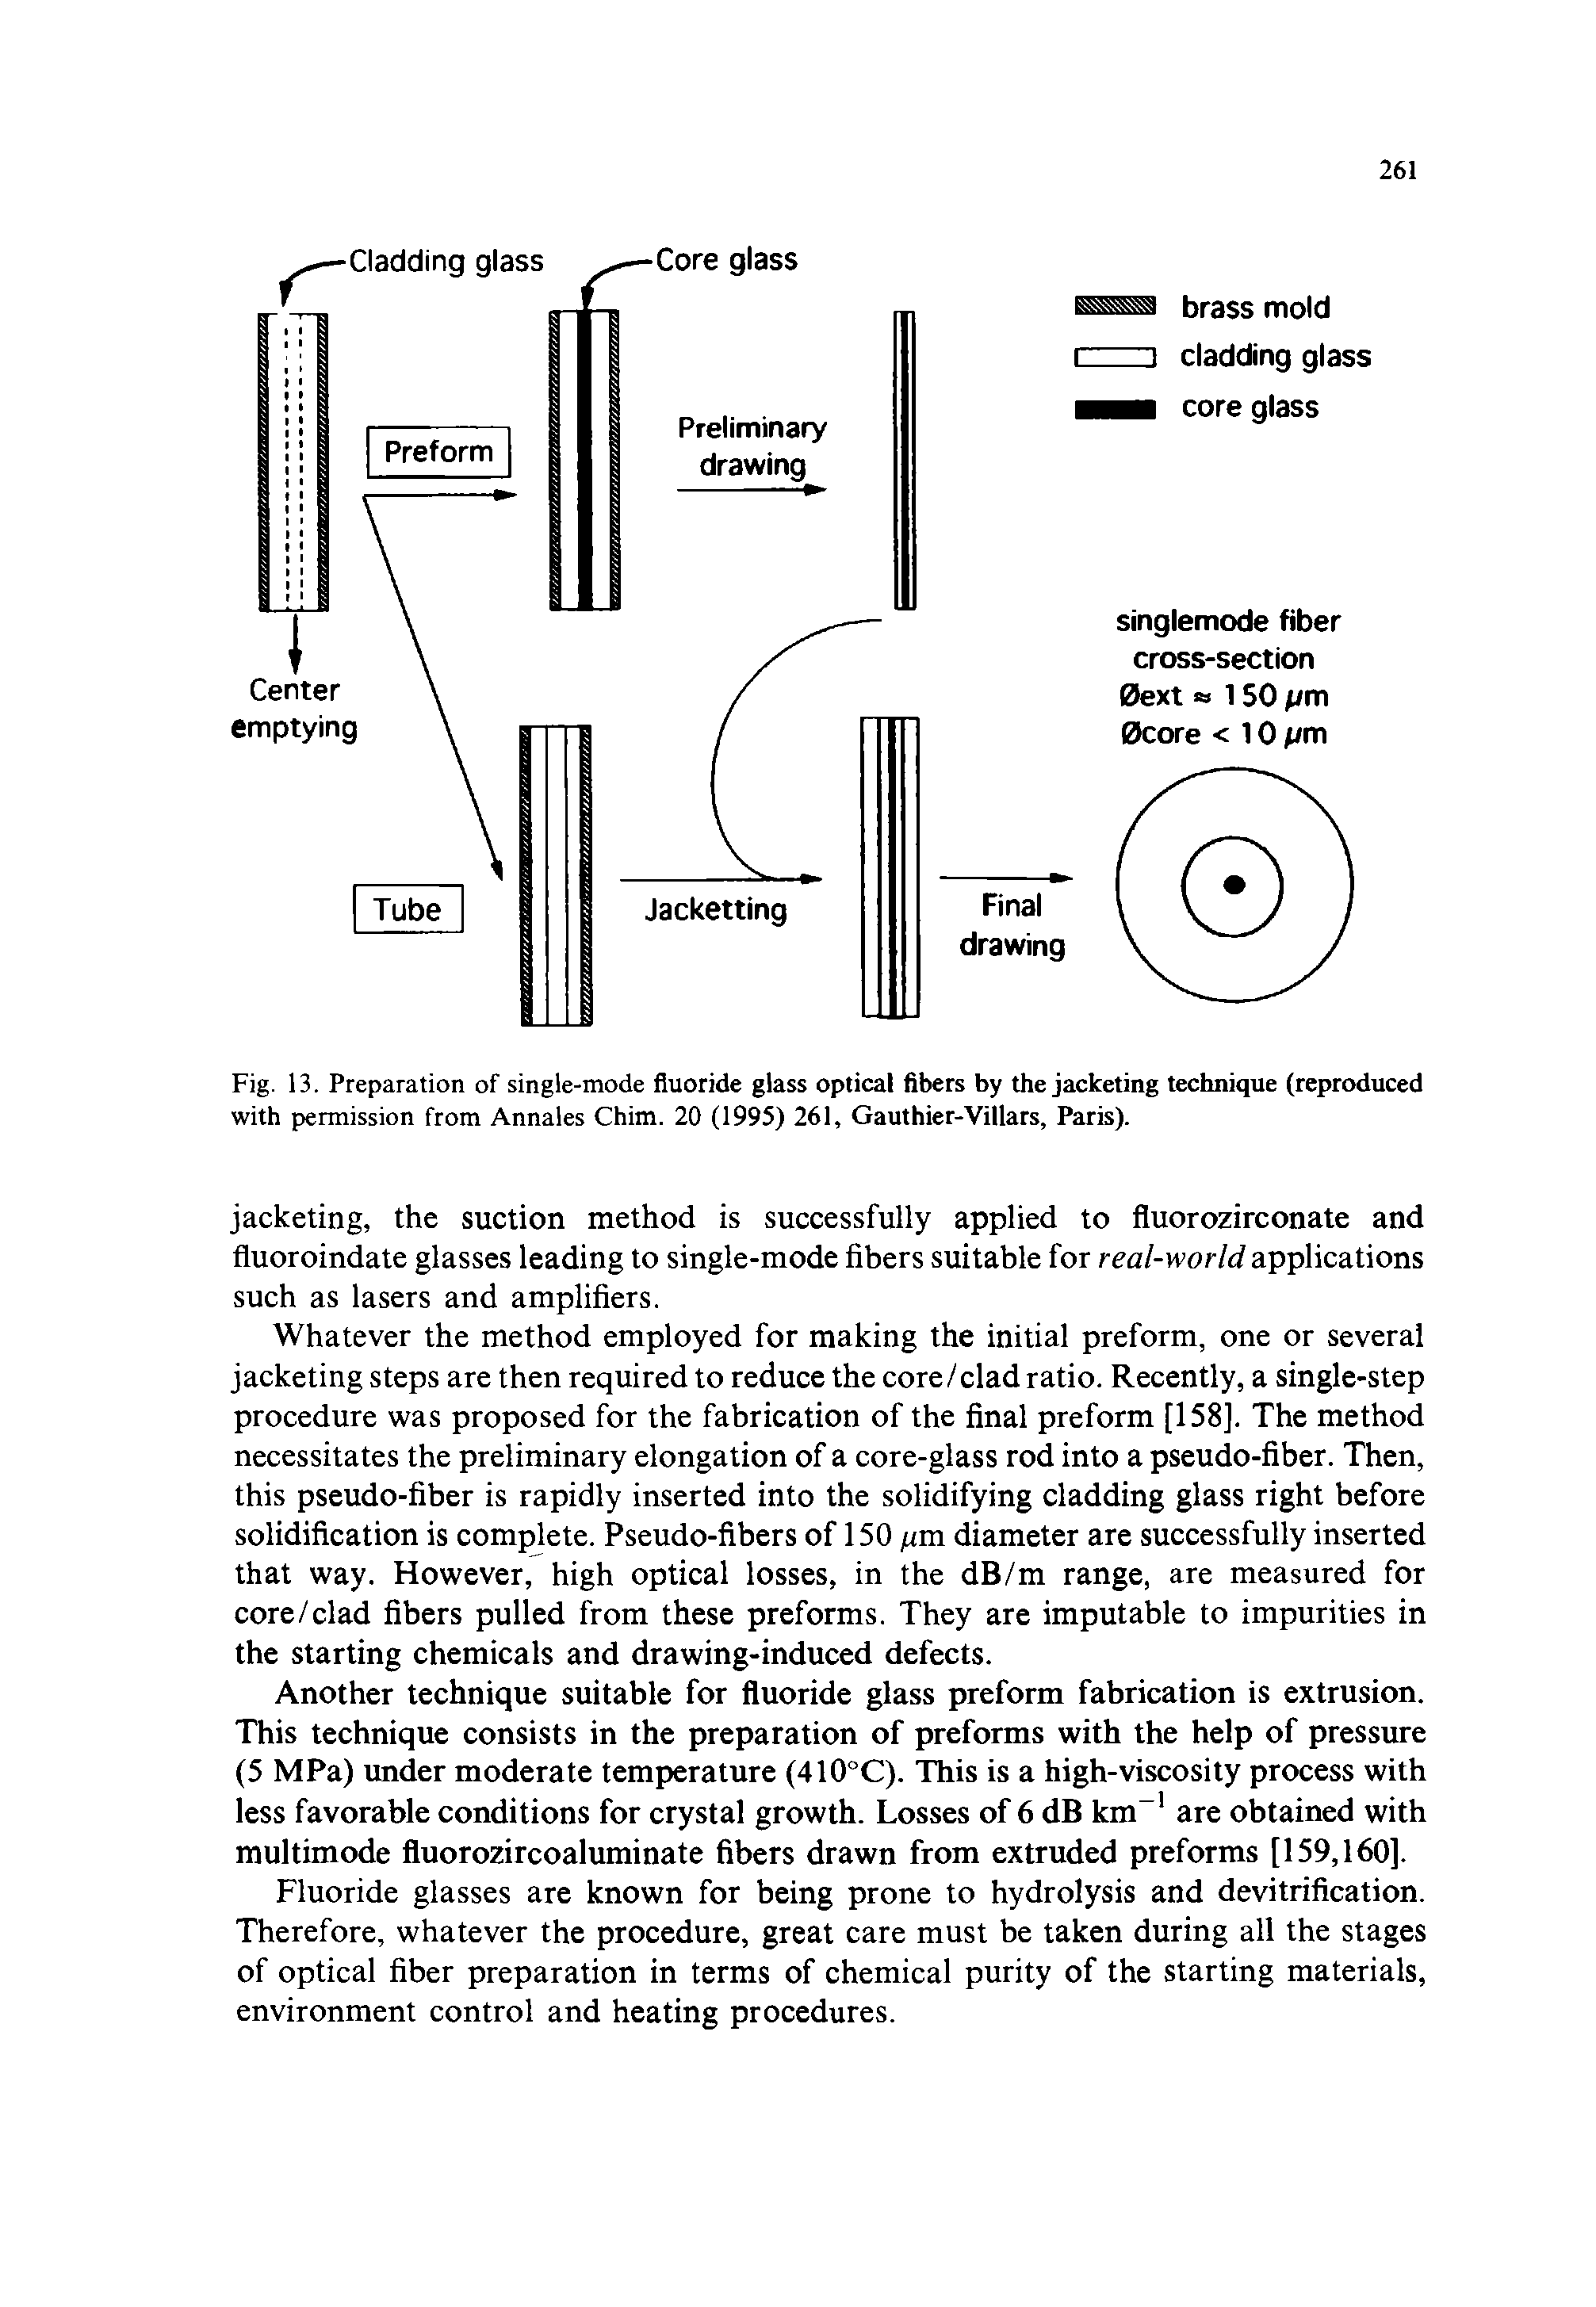 Fig. 13. Preparation of single-mode fluoride glass optical fibers by the jacketing technique (reproduced with permission from Annales Chim. 20 (1995) 261, Gauthier-Villars, Paris).